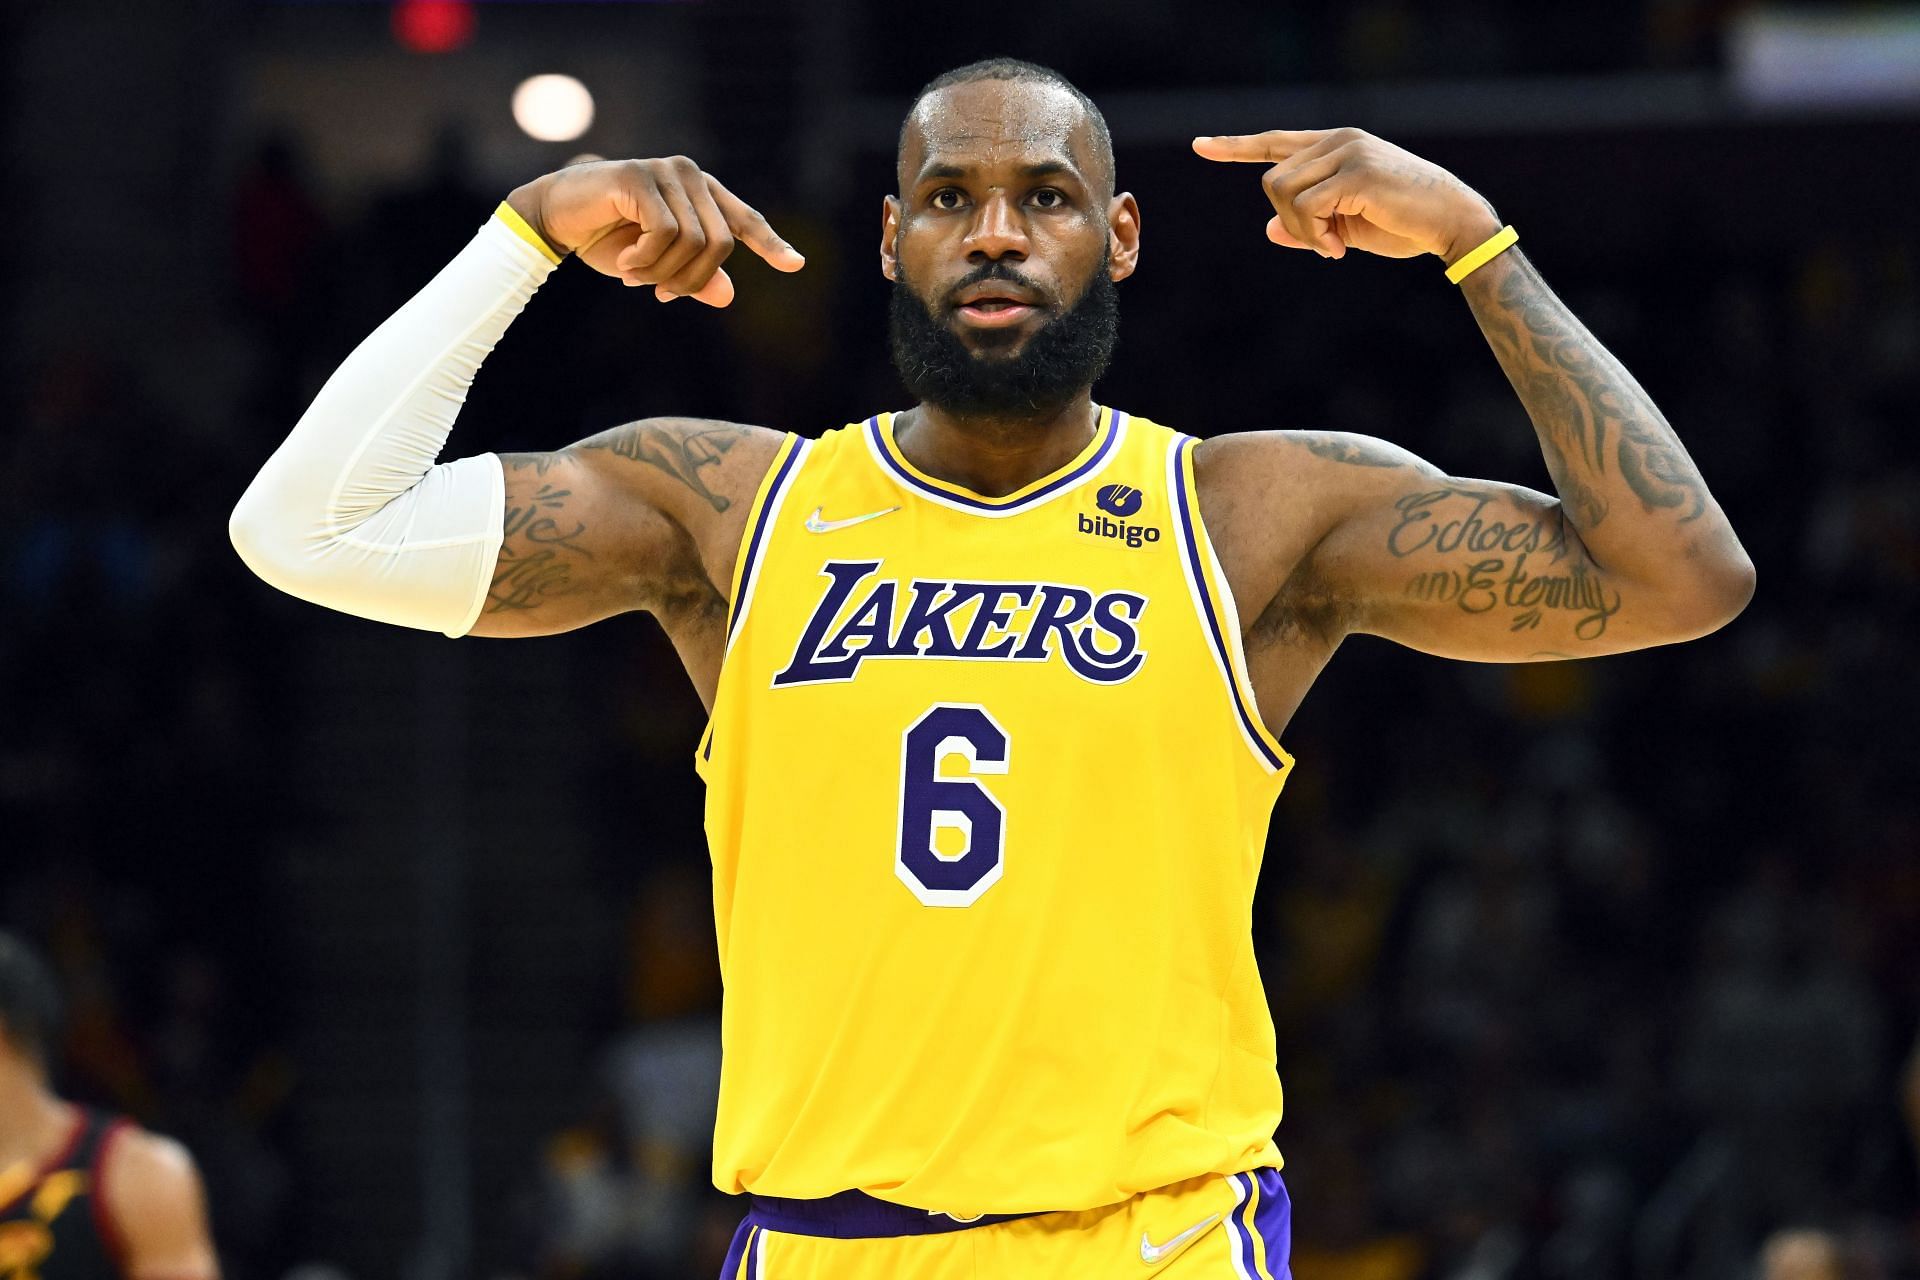 LeBron James of the LA Lakers celebrates during the fourth quarter against the Cleveland Cavaliers at Rocket Mortgage Fieldhouse on Monday in Cleveland, Ohio. The Lakers defeated the Cavaliers 131-120.